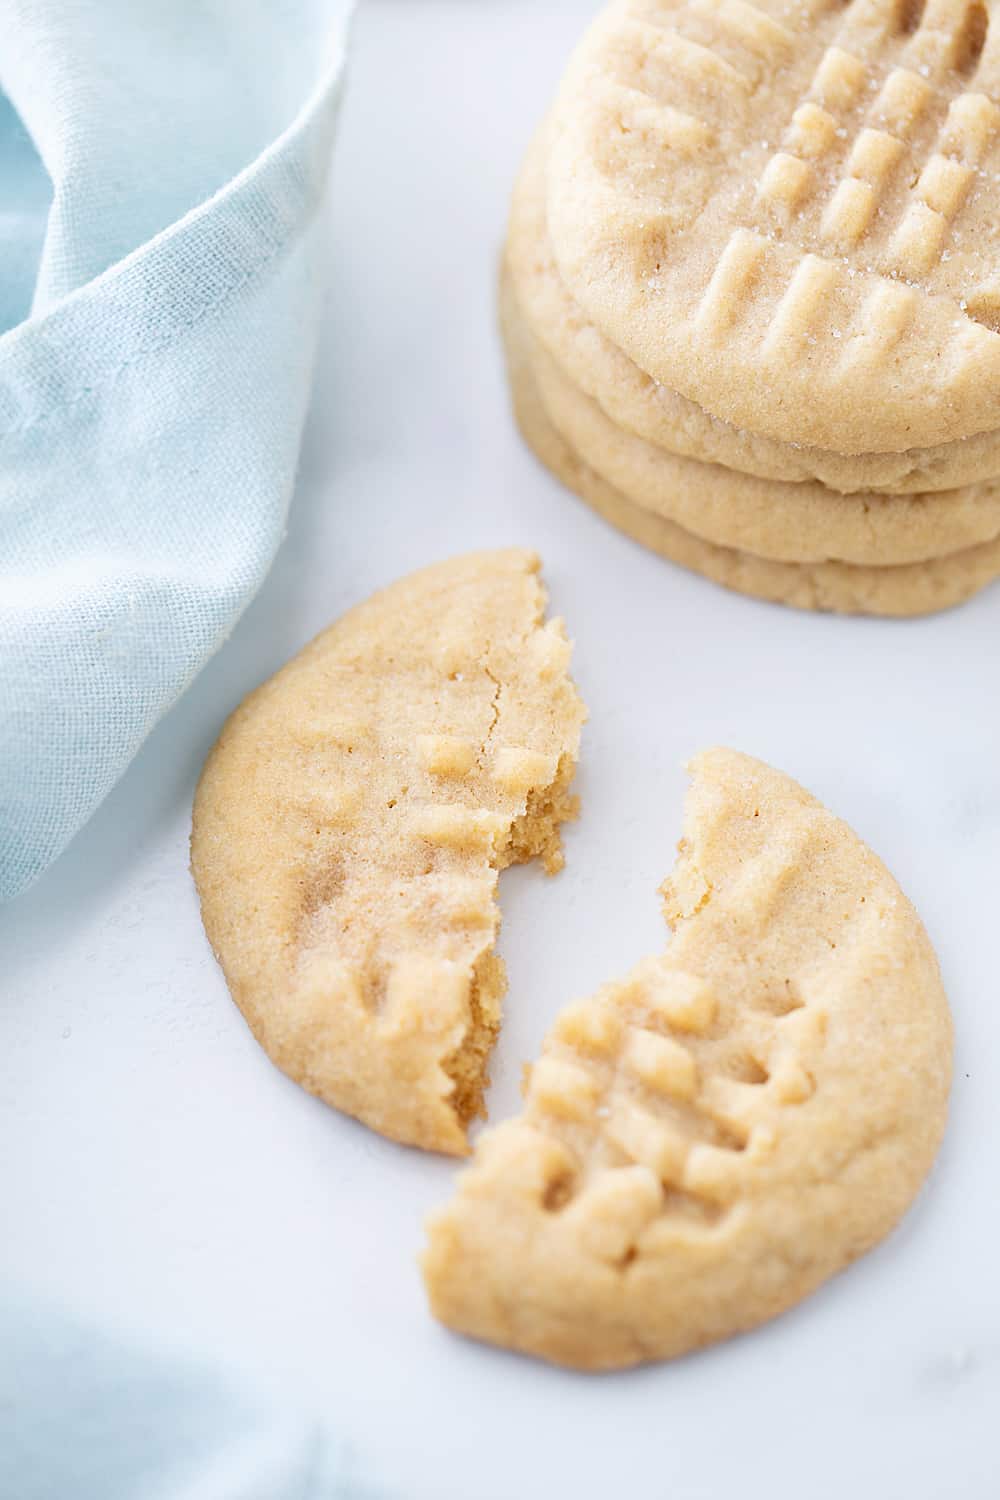 Old-Fashioned Peanut Butter Cookies - Old-fashioned peanut butter cookies are soft, chewy, and oh, so good! Friends and family (and my taste buds) always rave when I bake a batch. #halfscratched #peanutbutter #cookies #cookierecipe #baking #peanutbuttercookies #desserts #sweets #cookies